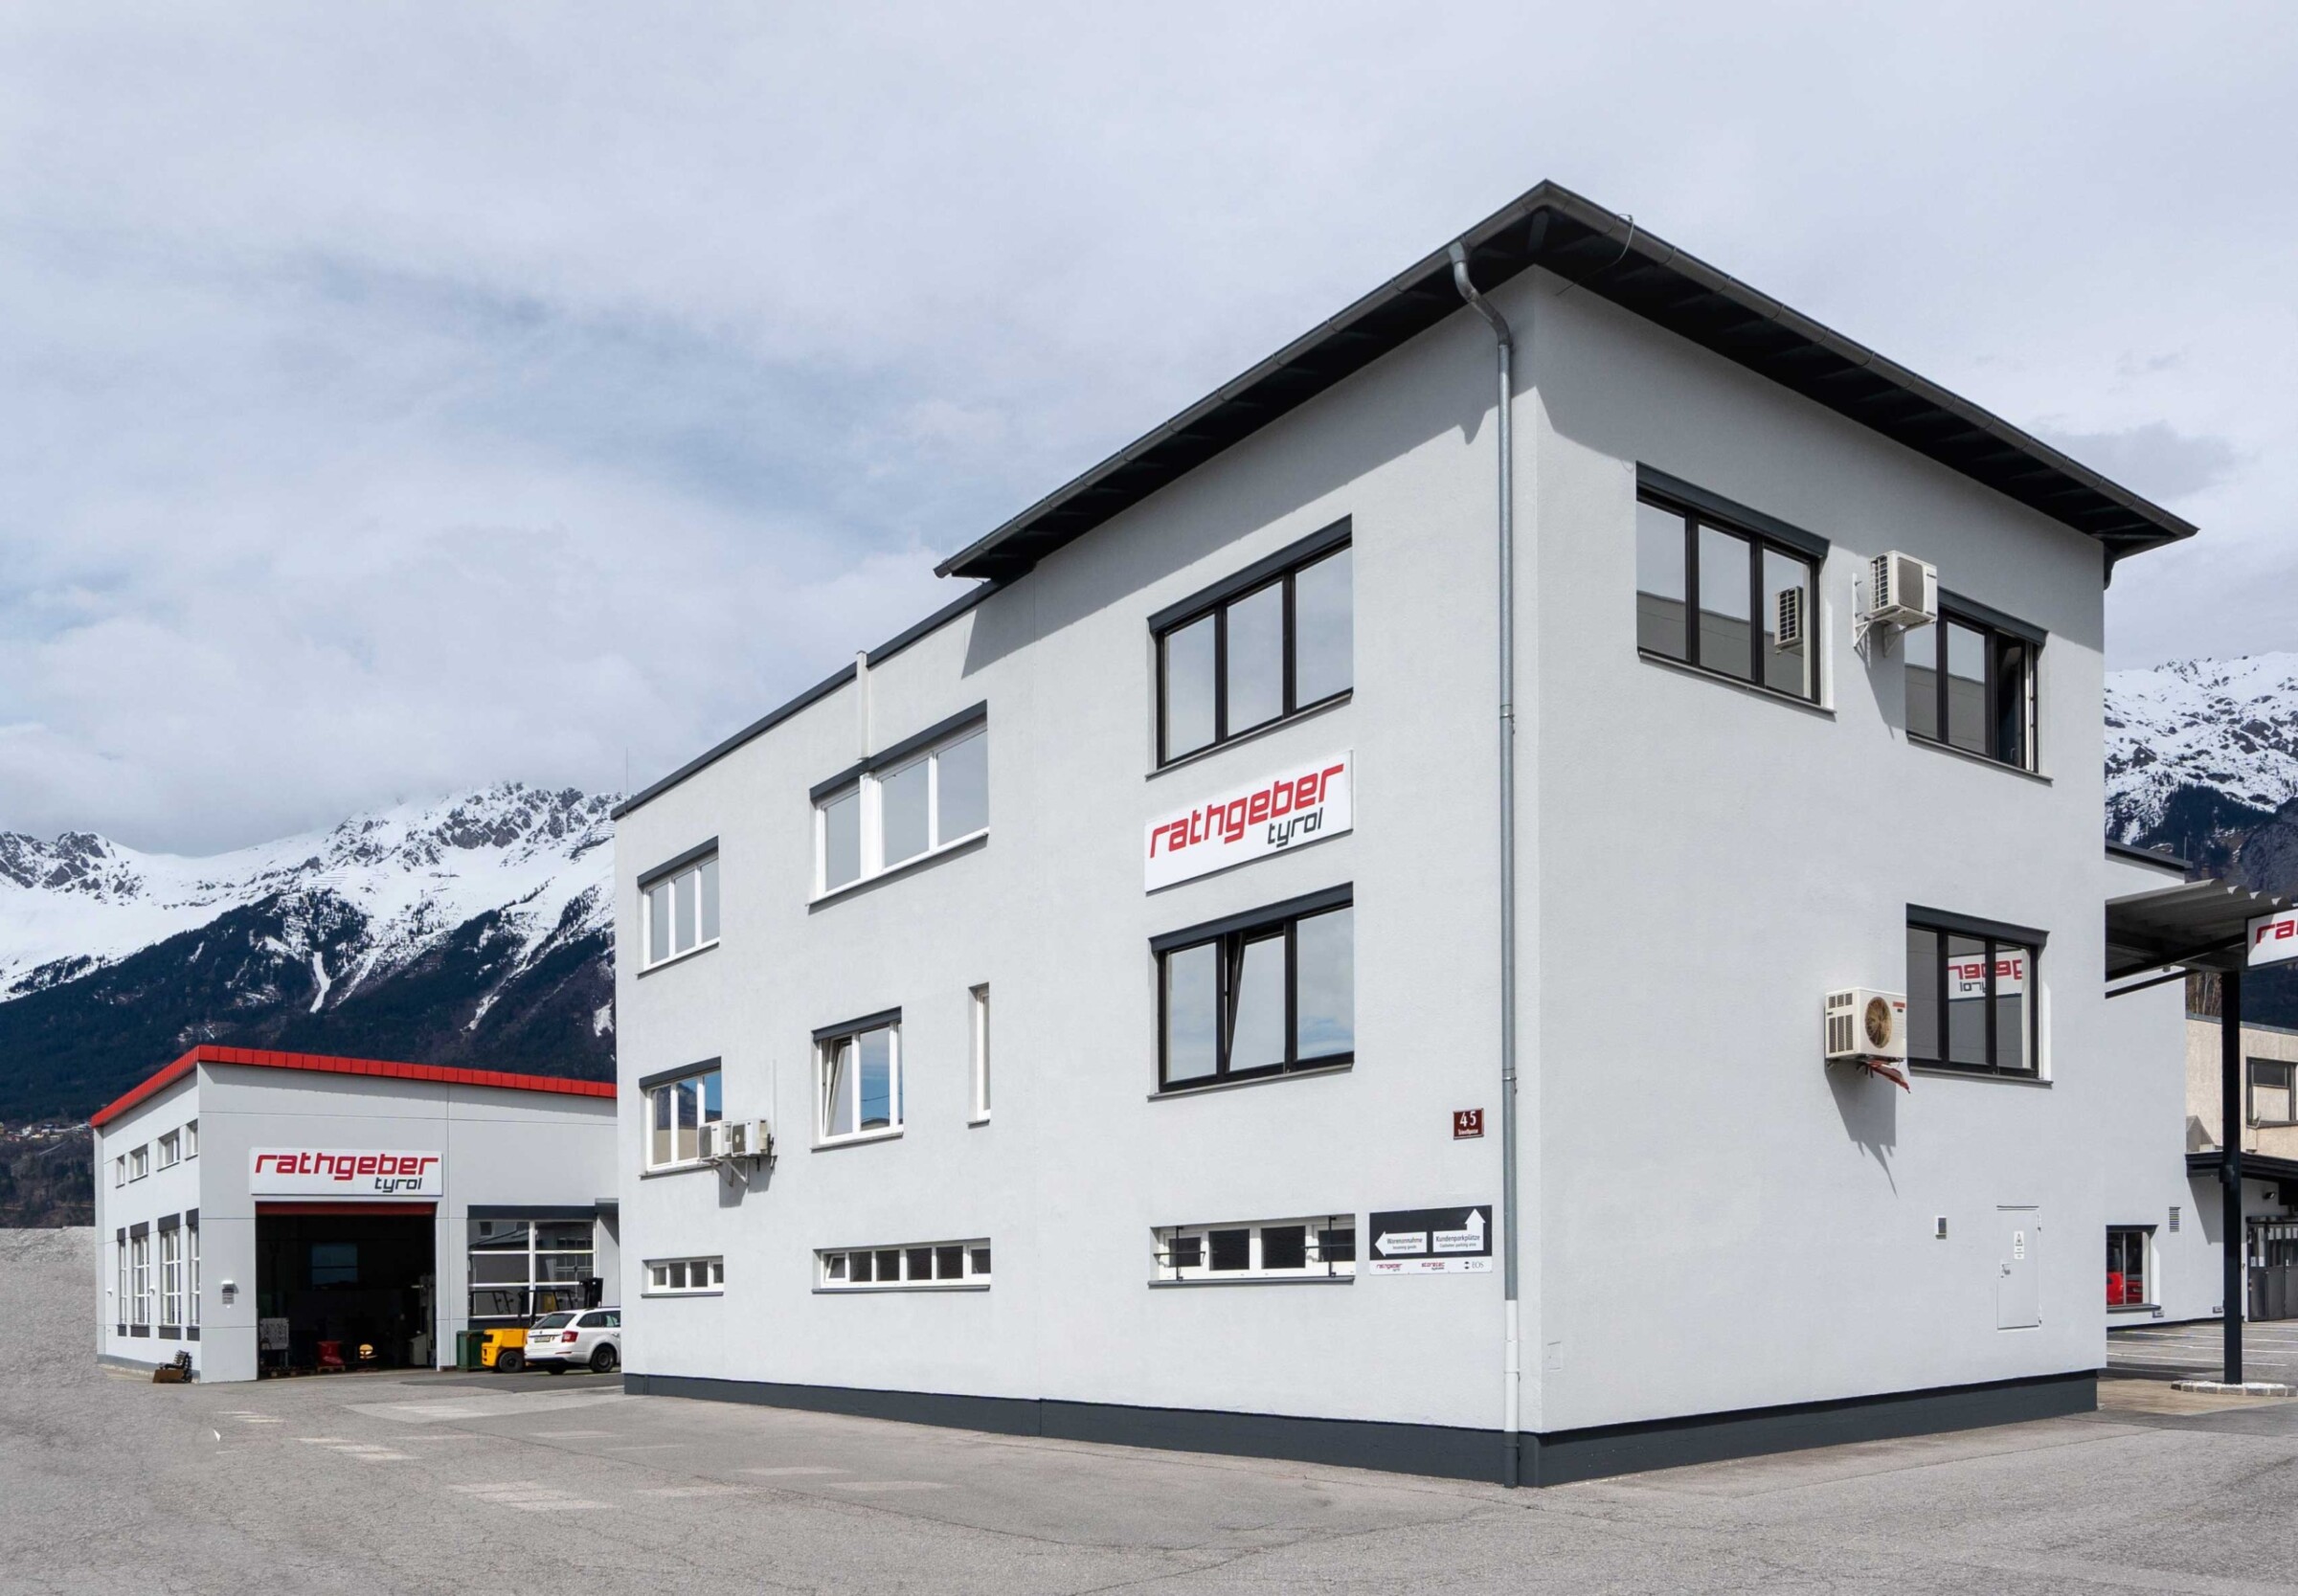 Rathgeber in Innsbruck contributes its expertise to the vehicle interior.